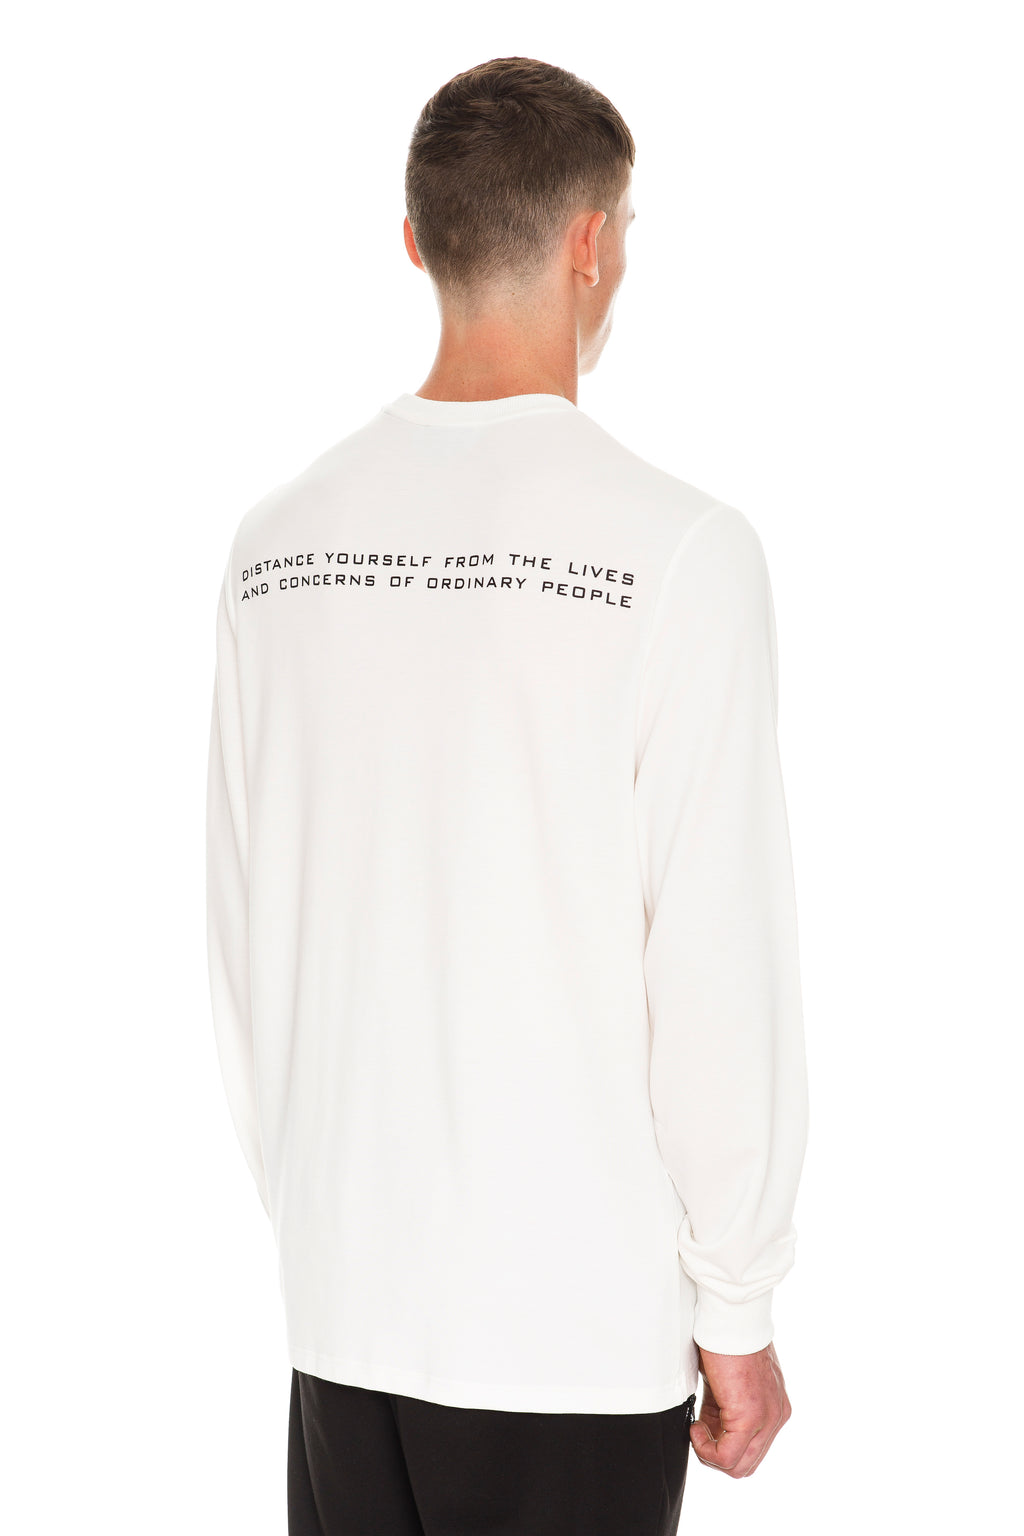 Rarefied Quote Long Sleeve T-Shirt In White With A Message On It - Back View